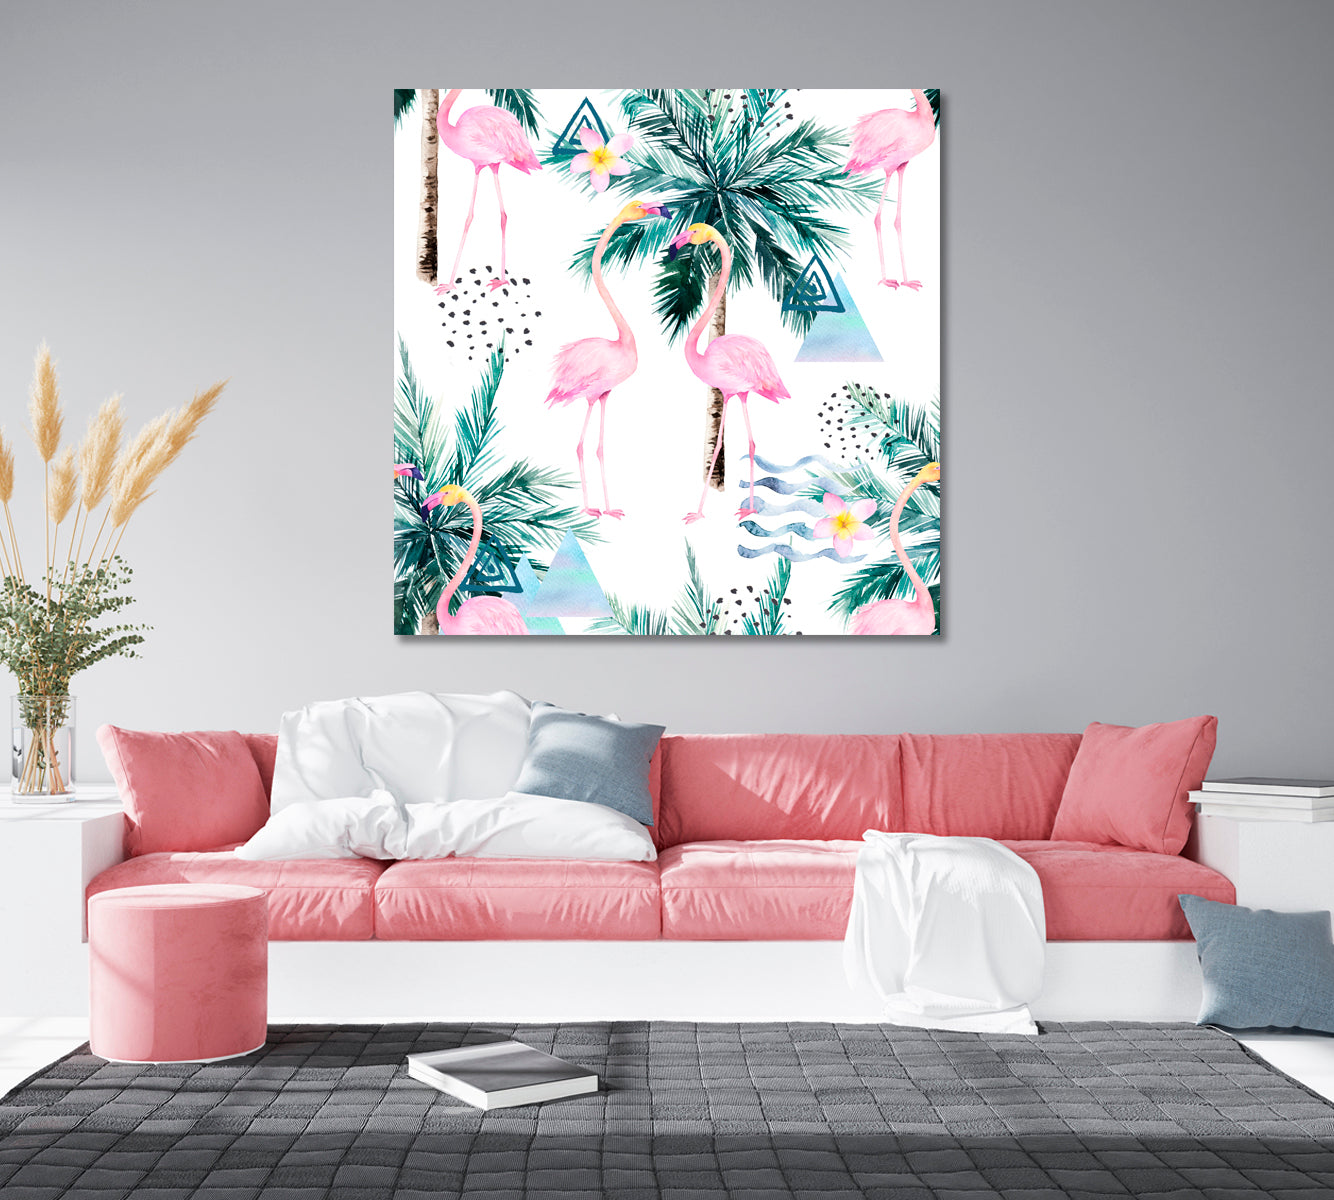 Abstract Coconut Palms with Flamingos Canvas Print-Canvas Print-CetArt-1 panel-12x12 inches-CetArt